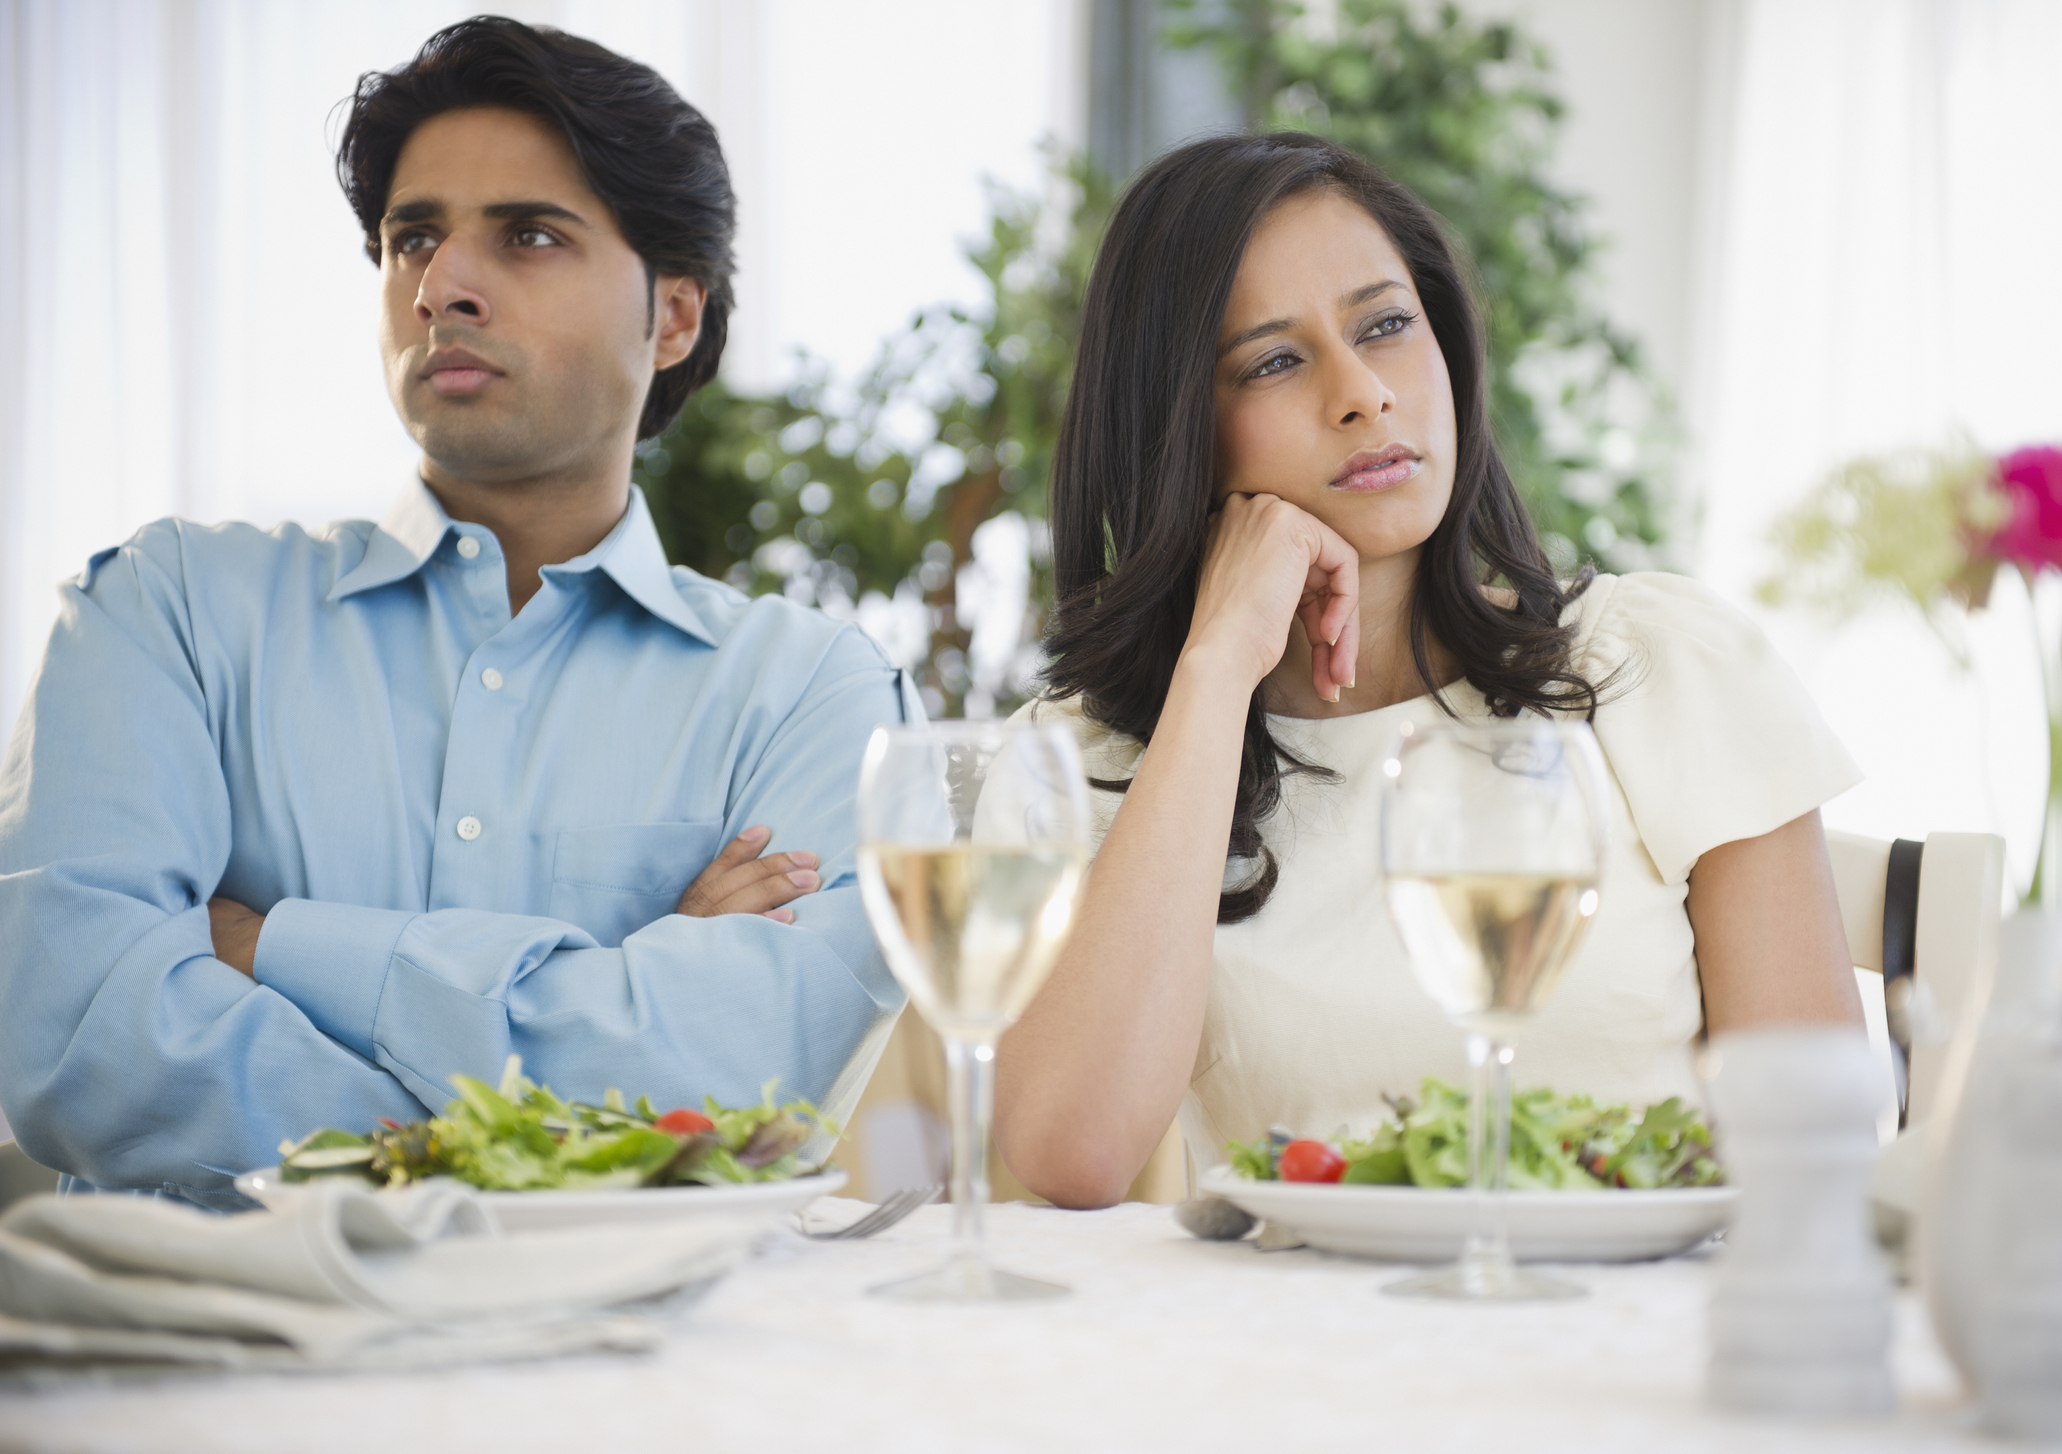 Two bored, upset people sitting at a dining table